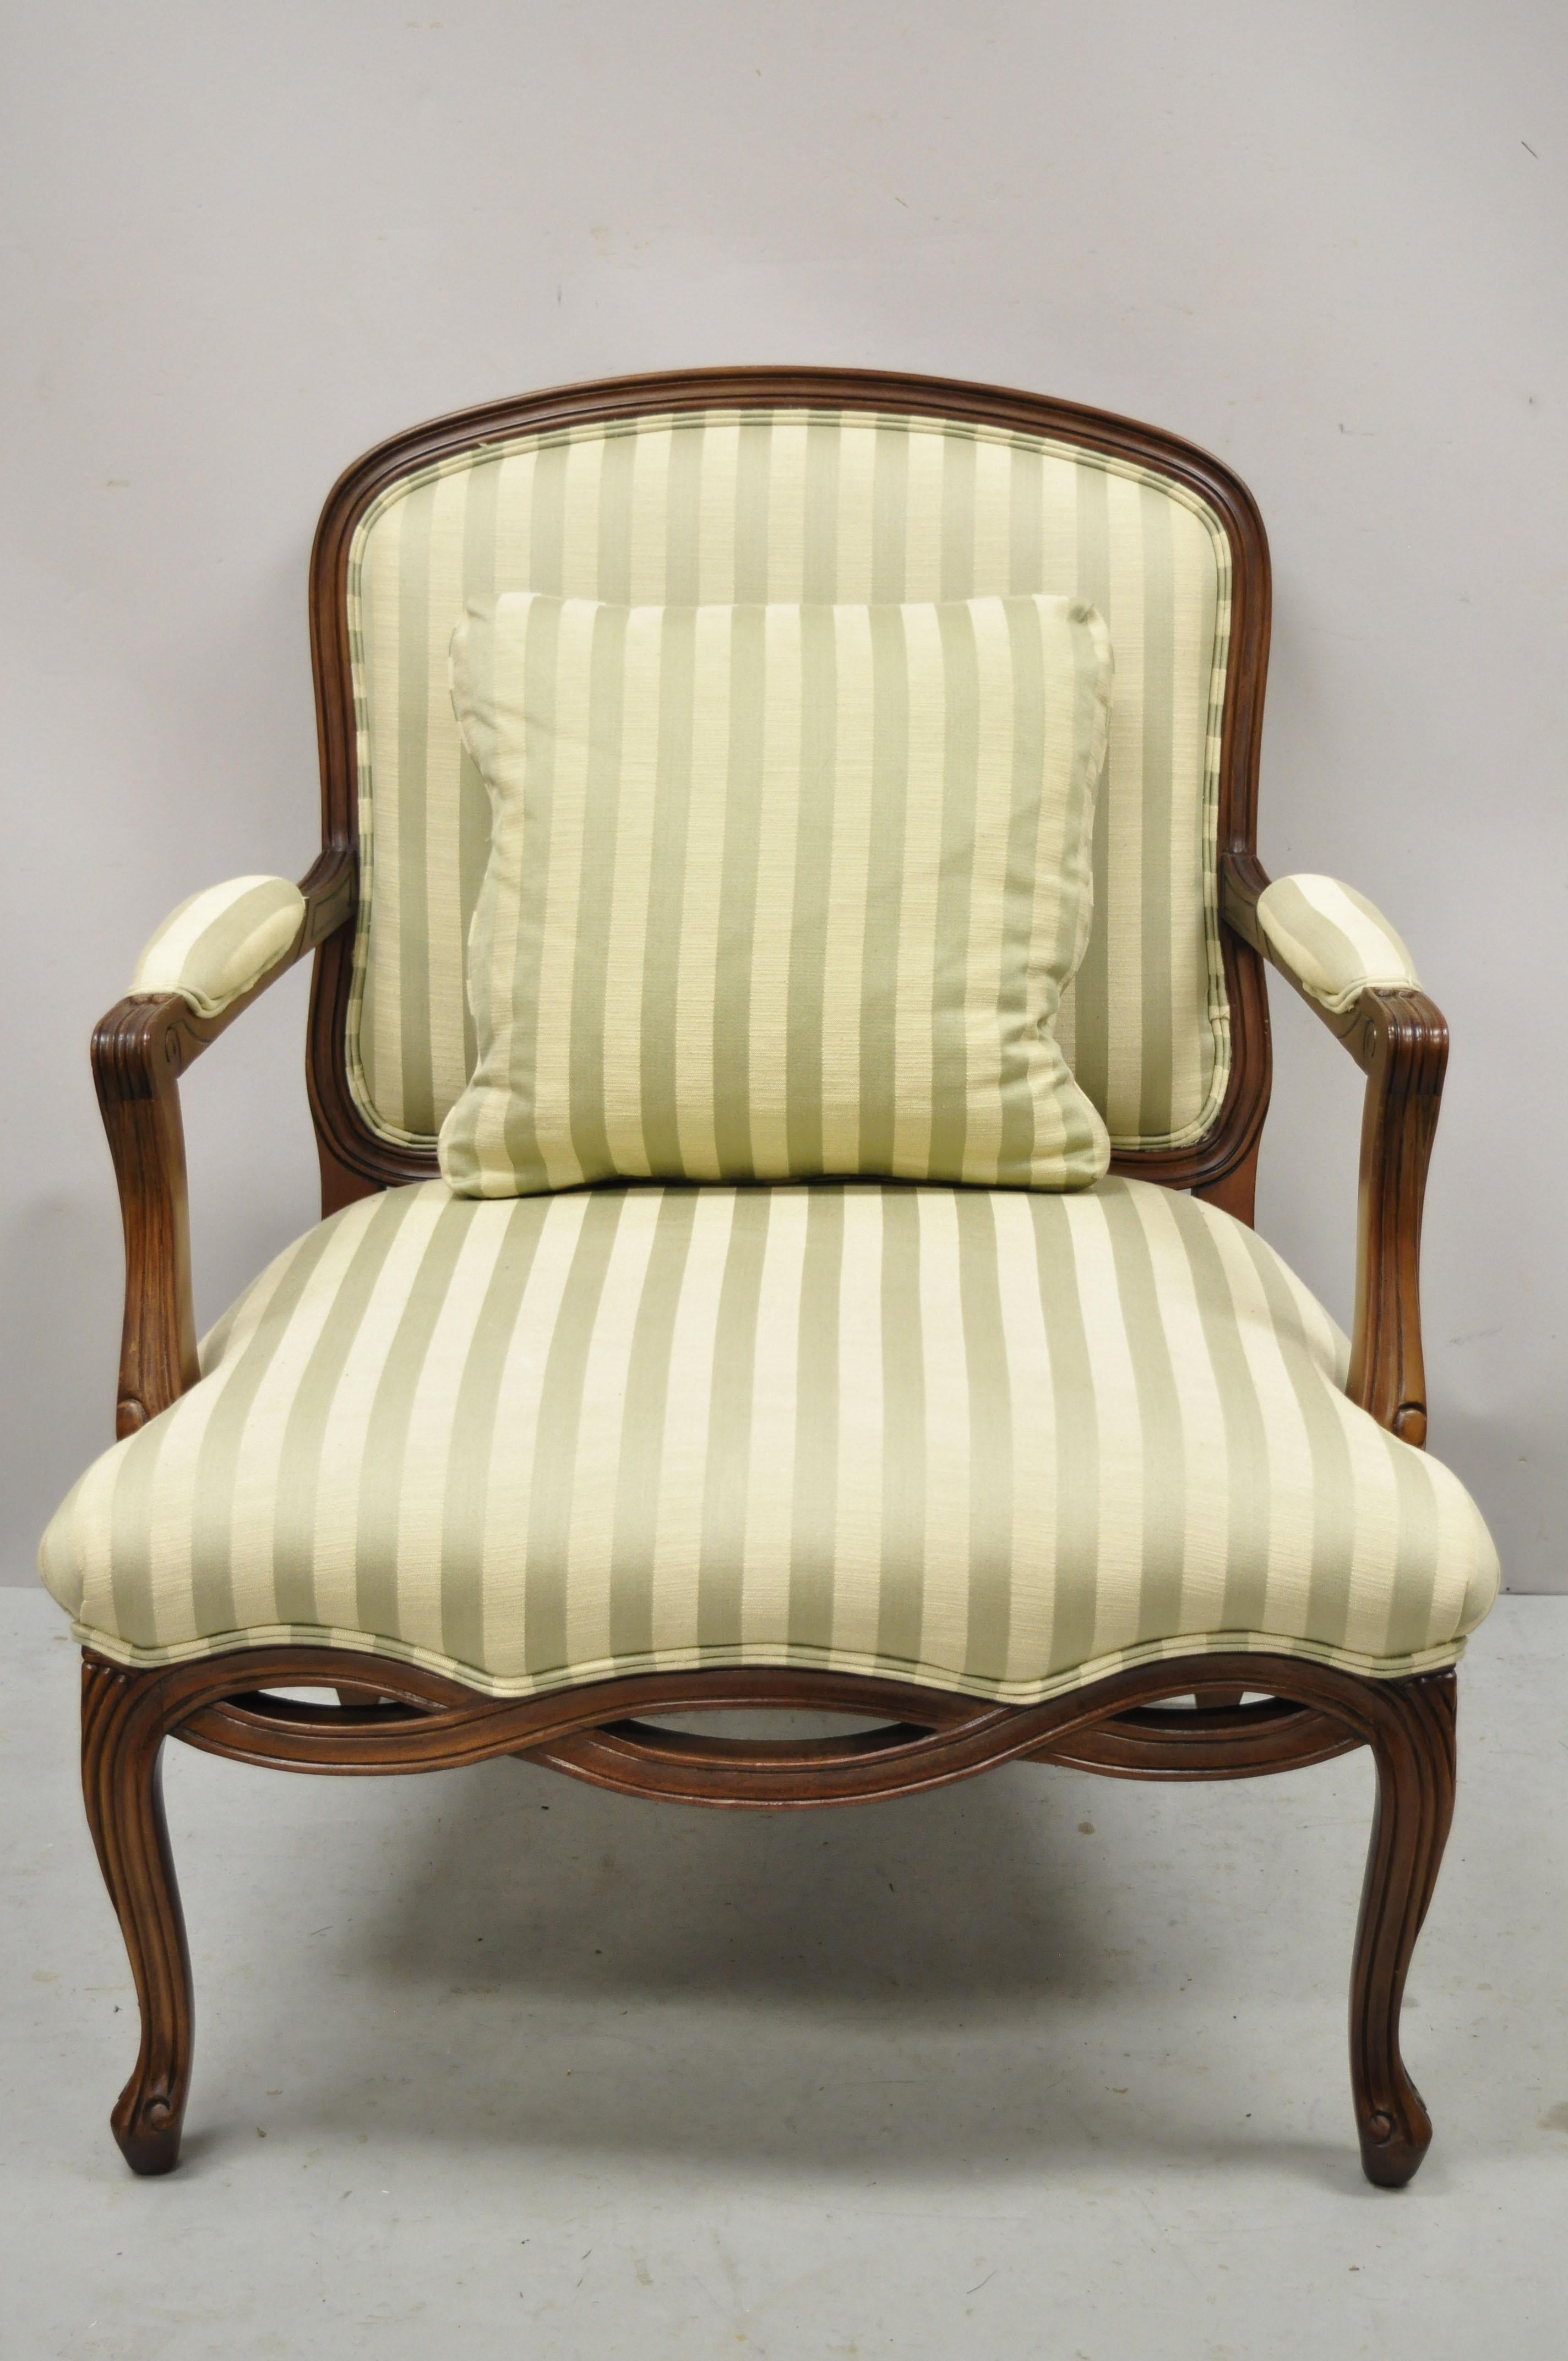 Sherrill French Provincial Louis XV style woven skirt bergere lounge arm chair. Item features green striped upholstery, carved woven skirt, very nice item, great style and form. Measurements: 38